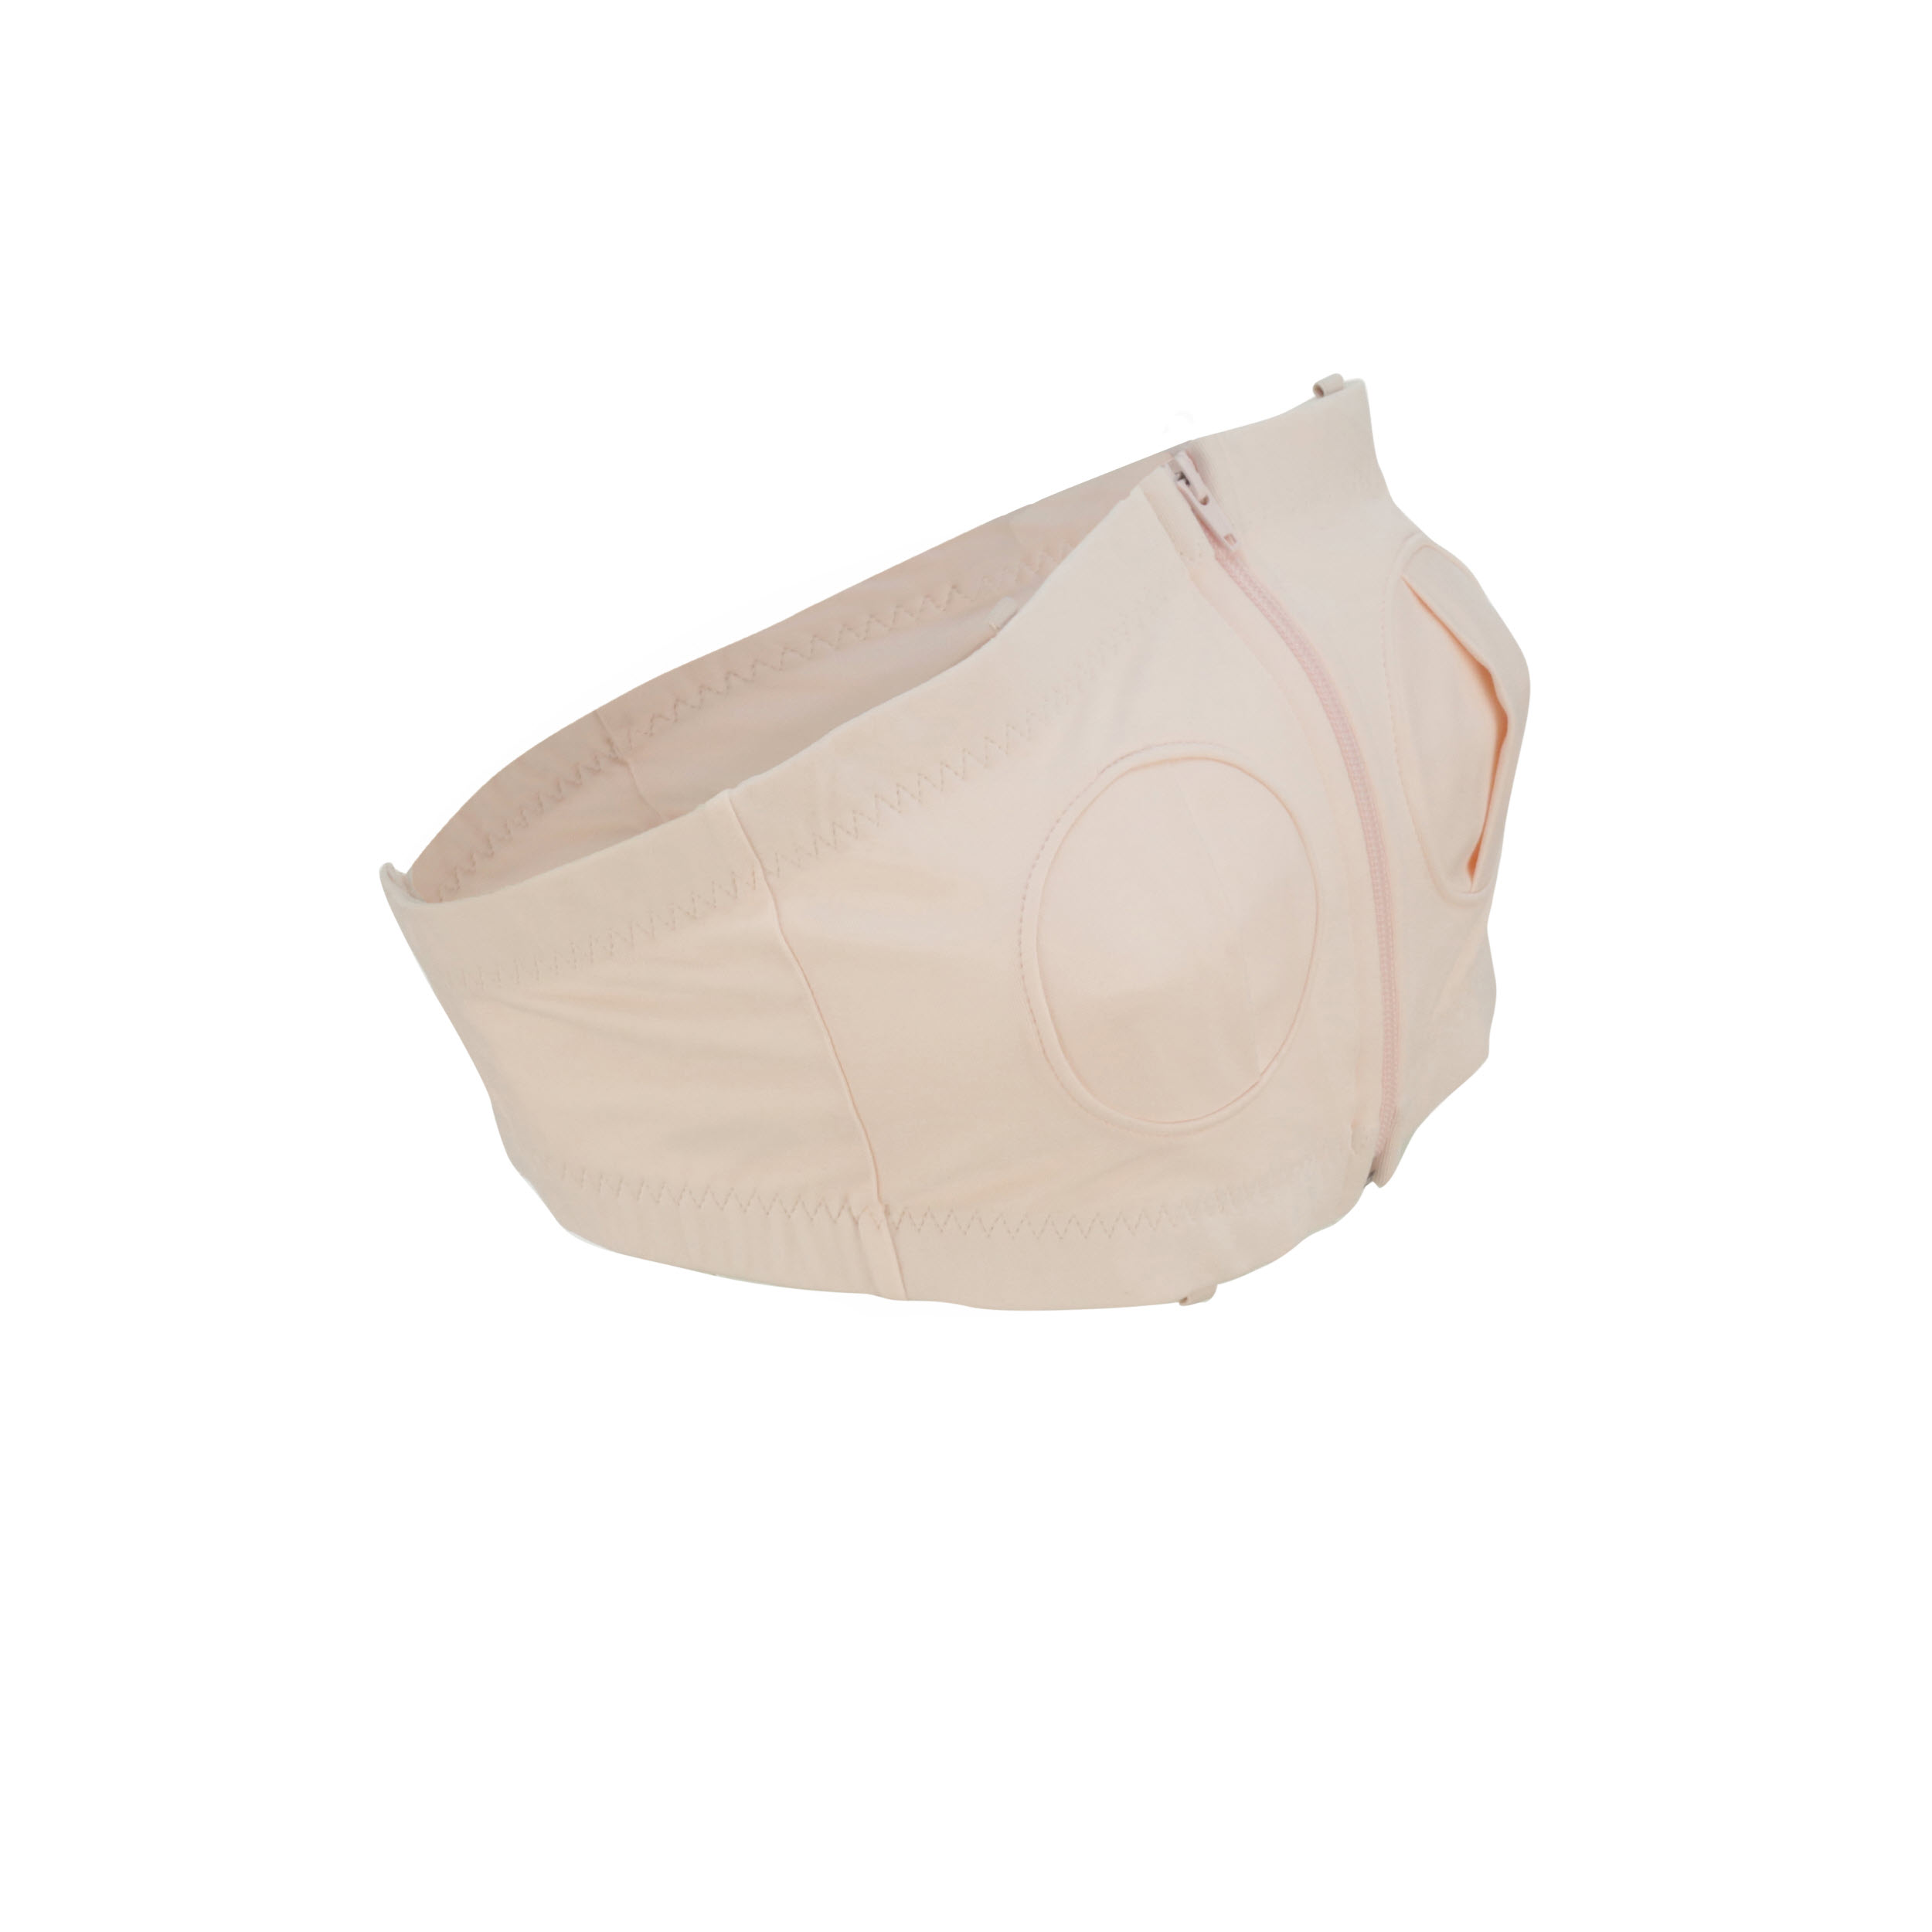 Lansinoh Simple Wishes Hands Pumping Bra Neutral Pink L to Plus